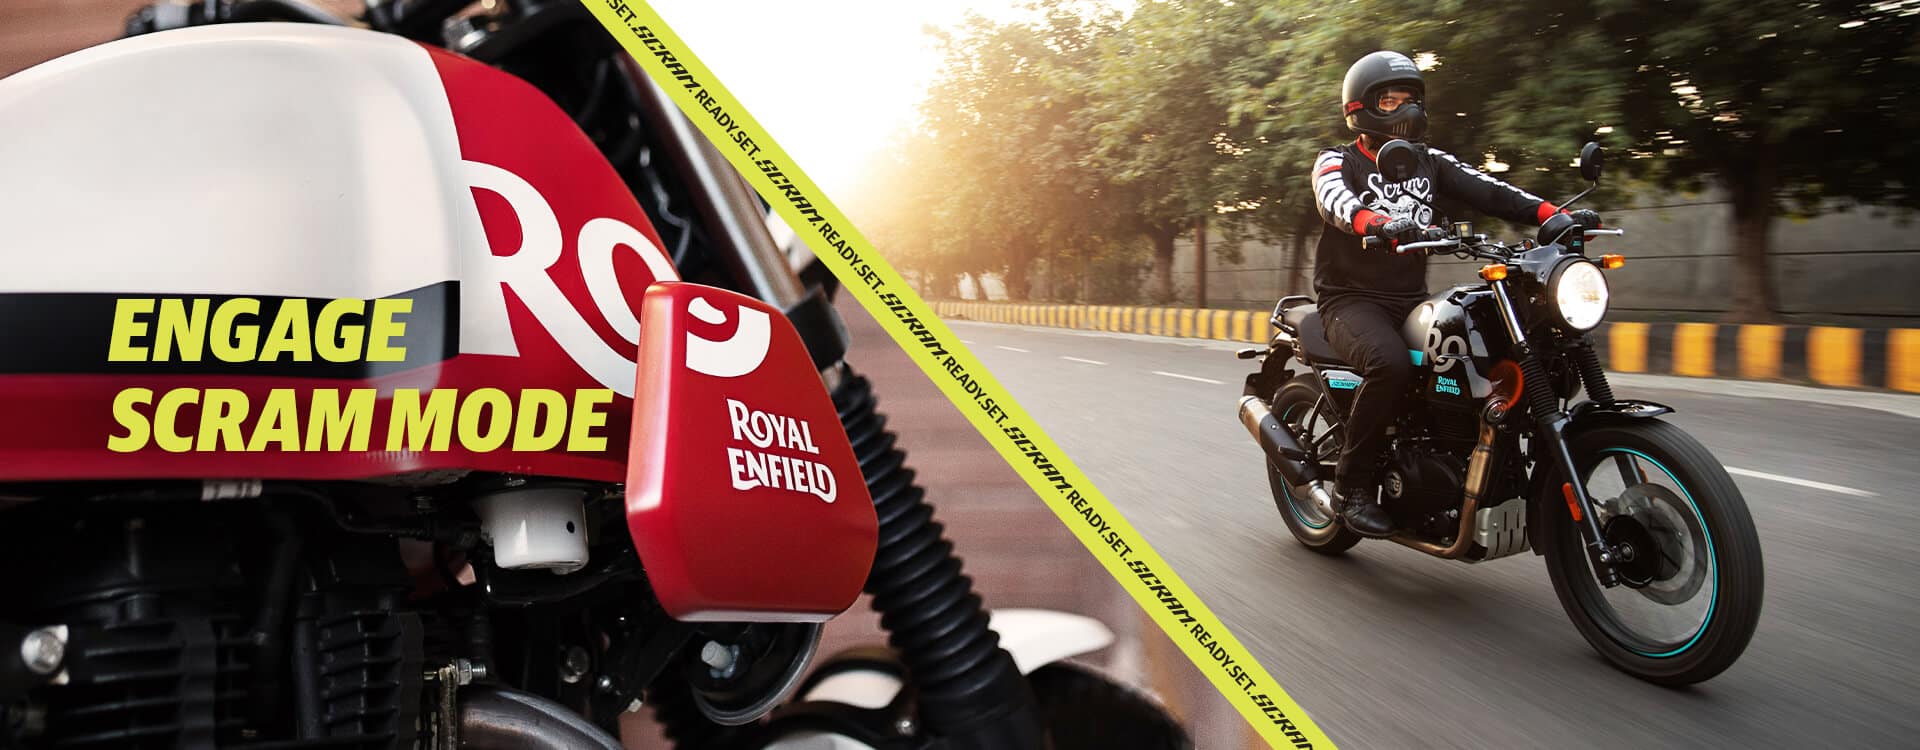 Navigate the urban game of snakes and ladders with the Royal Enfield Scram